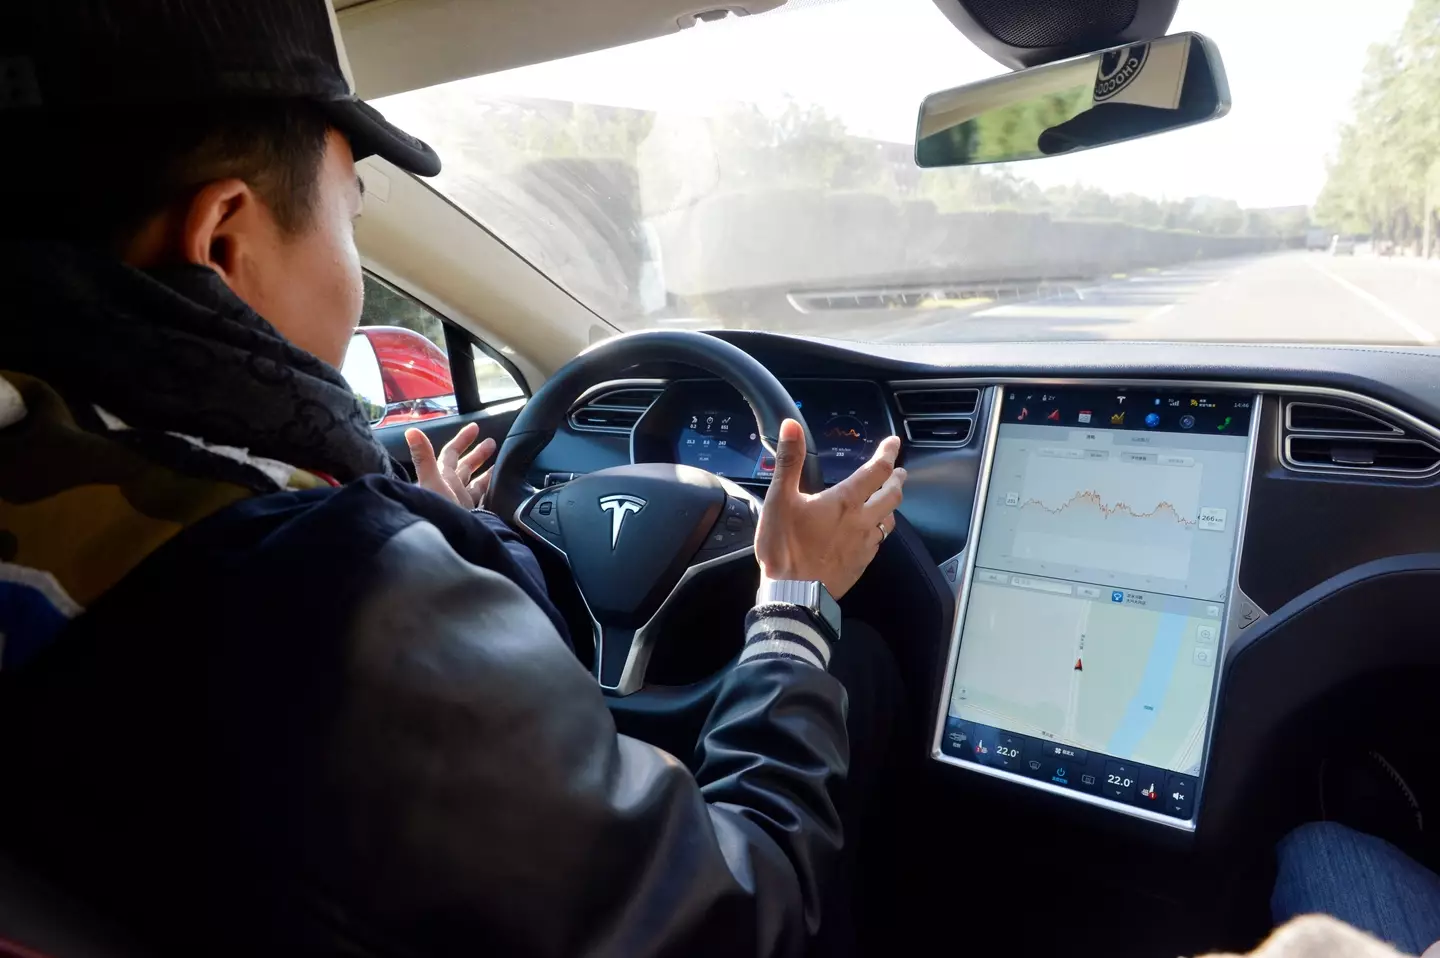 Even if the car can drive itself Tesla have been clear someone should be behind the wheel.